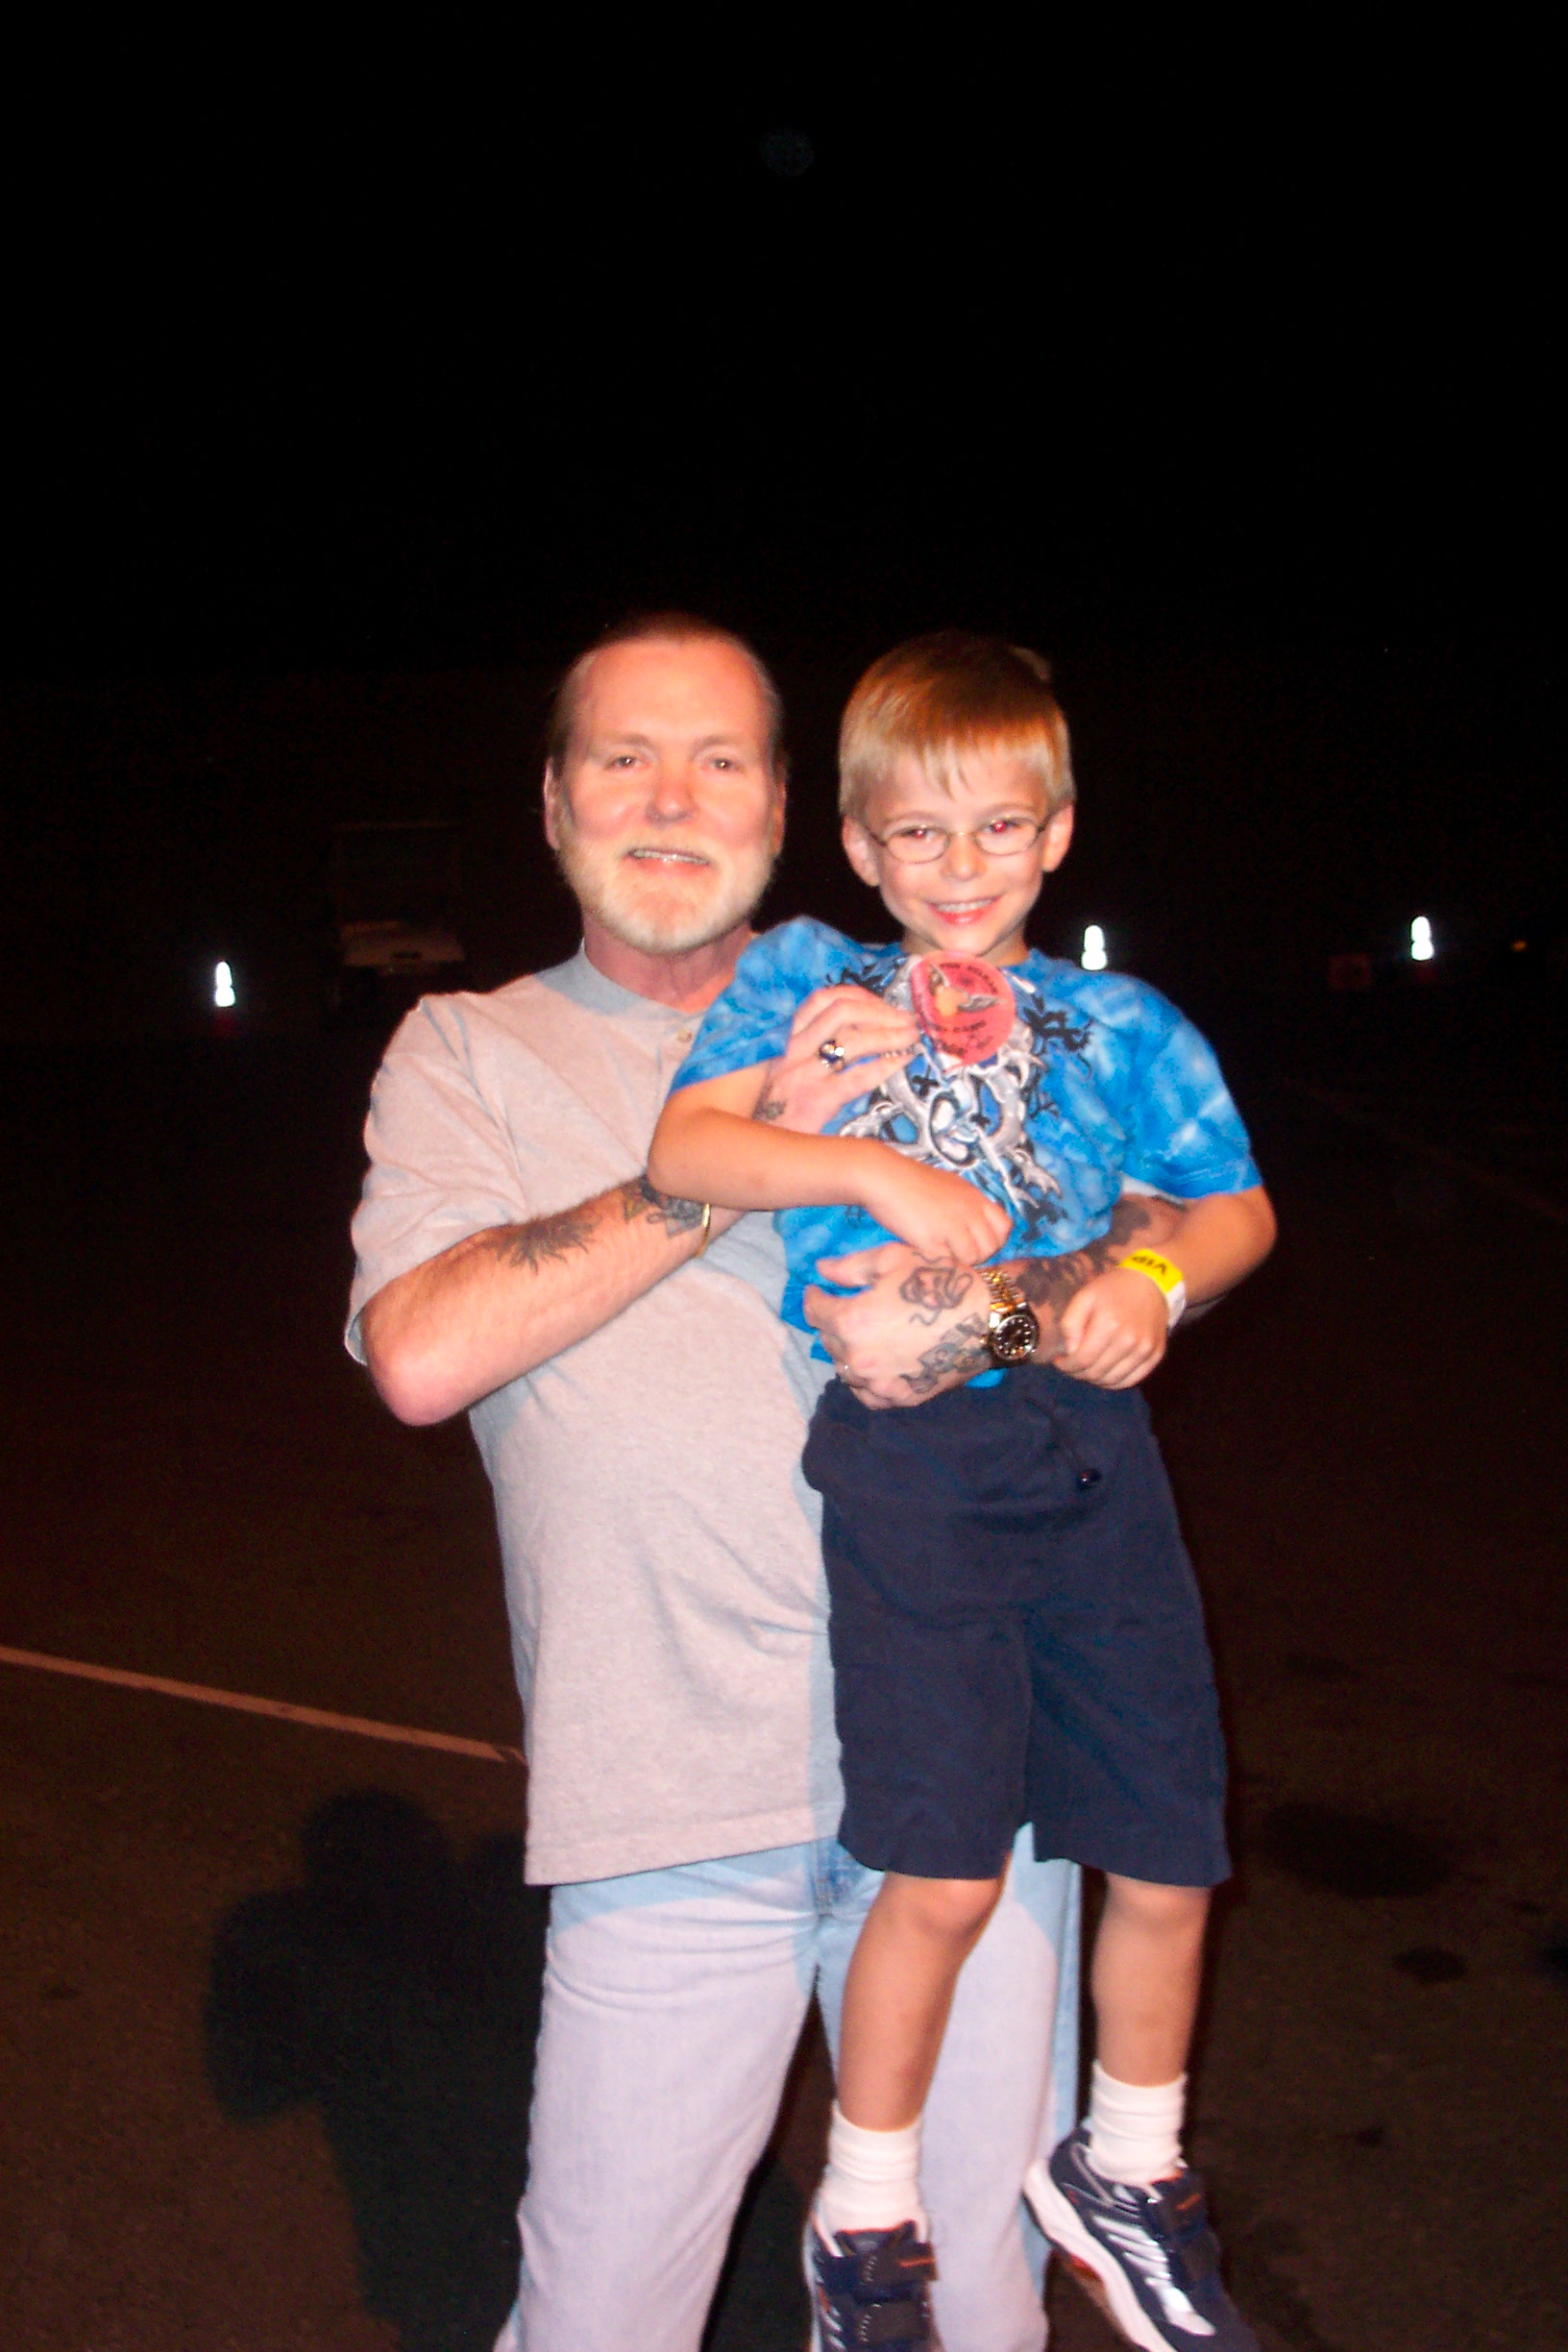 My son Jason, at his second show, and first meeting with Gregg at the PNC Bank Arts Center 8/23/05